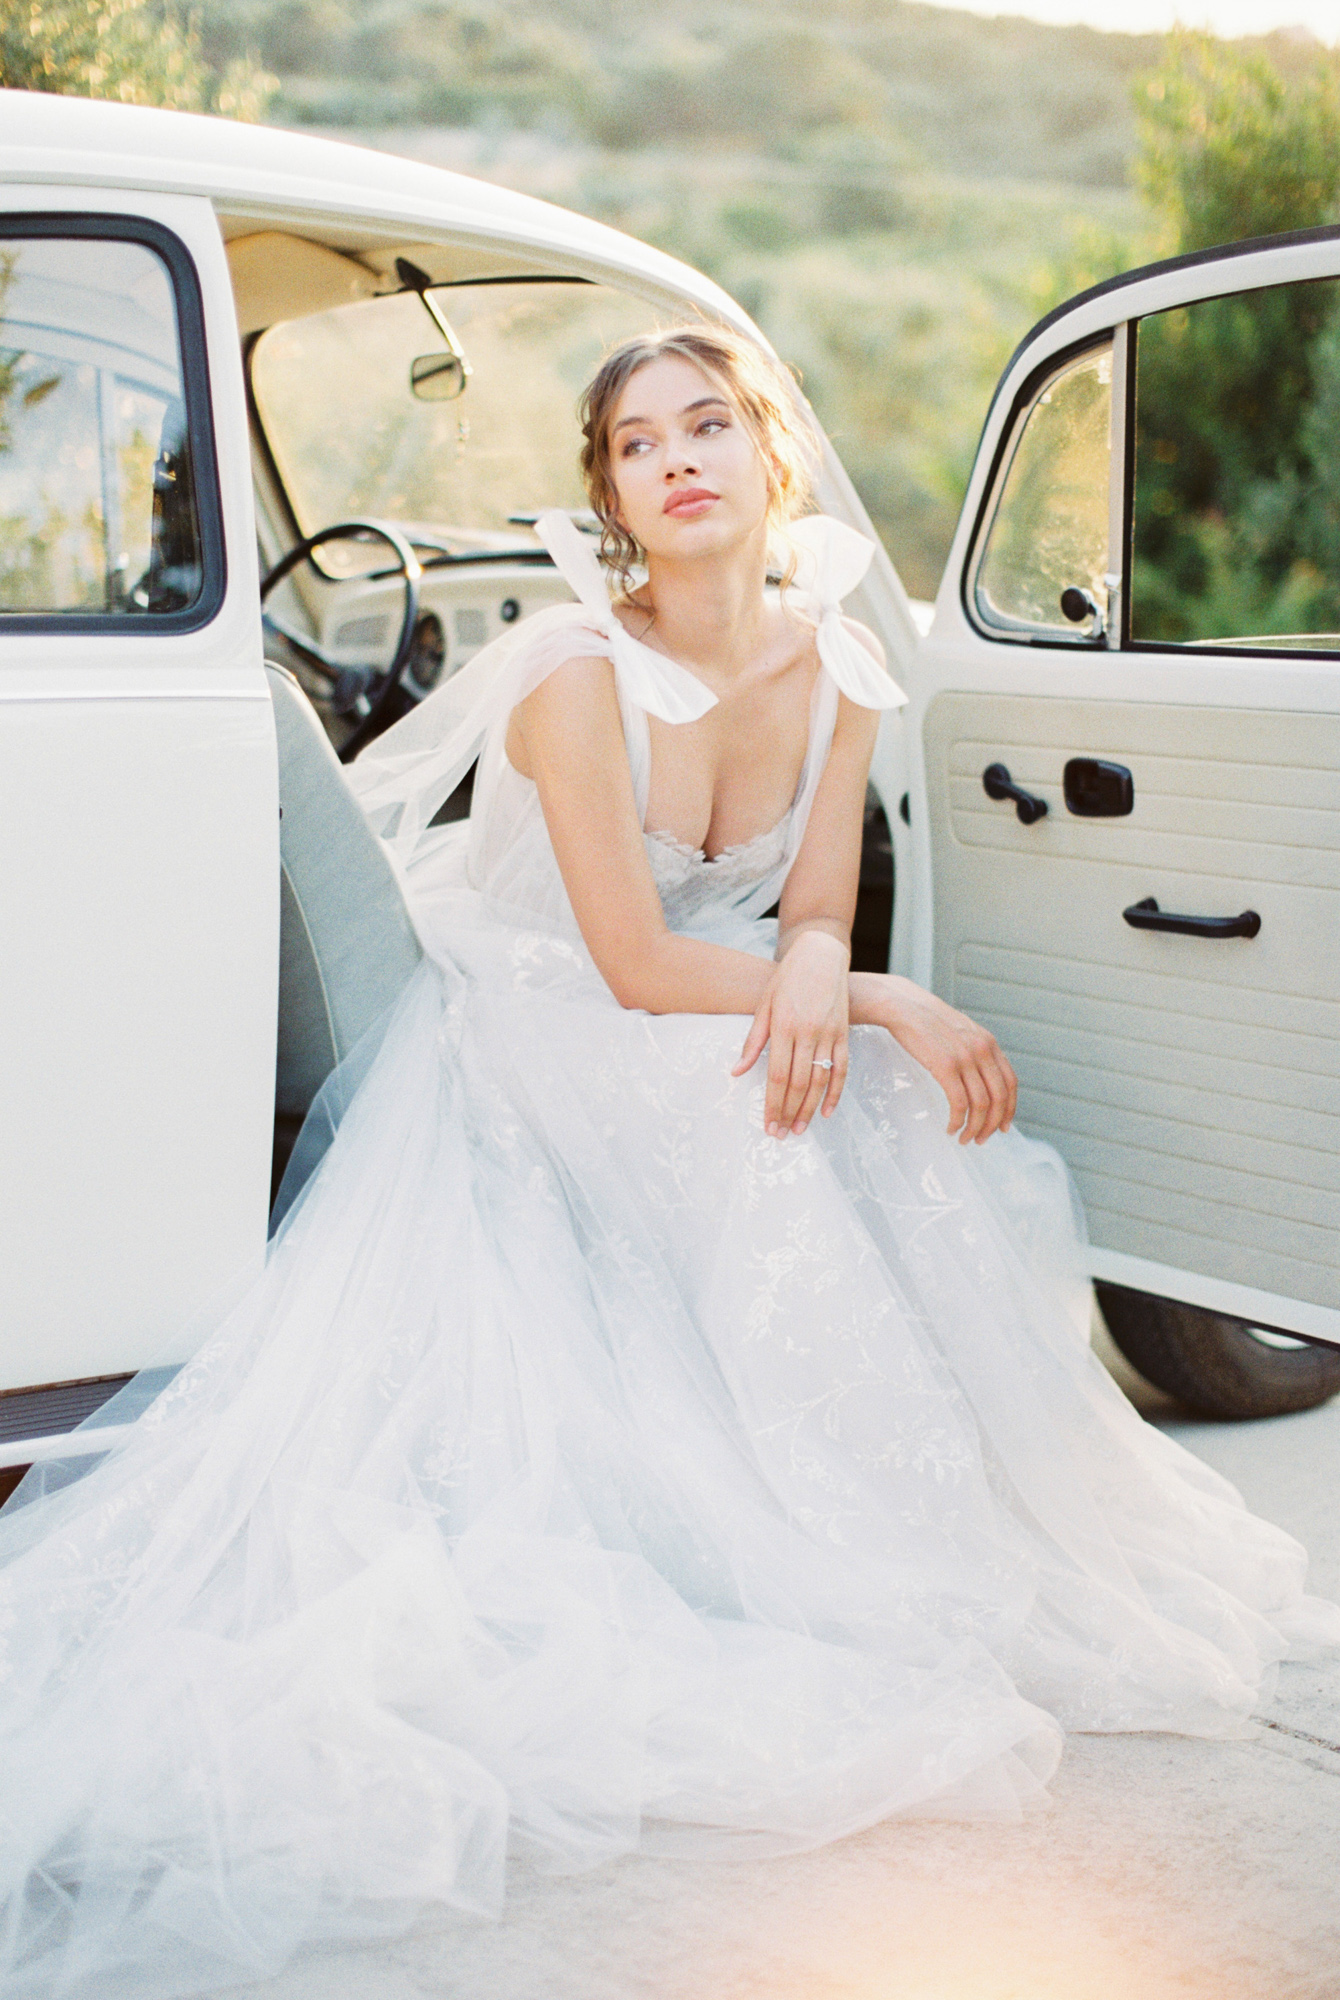 Modern bride in a getaway car at a sunset wedding editorial in Grecotel Agreco Farms Crete Greece as published on Ruffled blog.